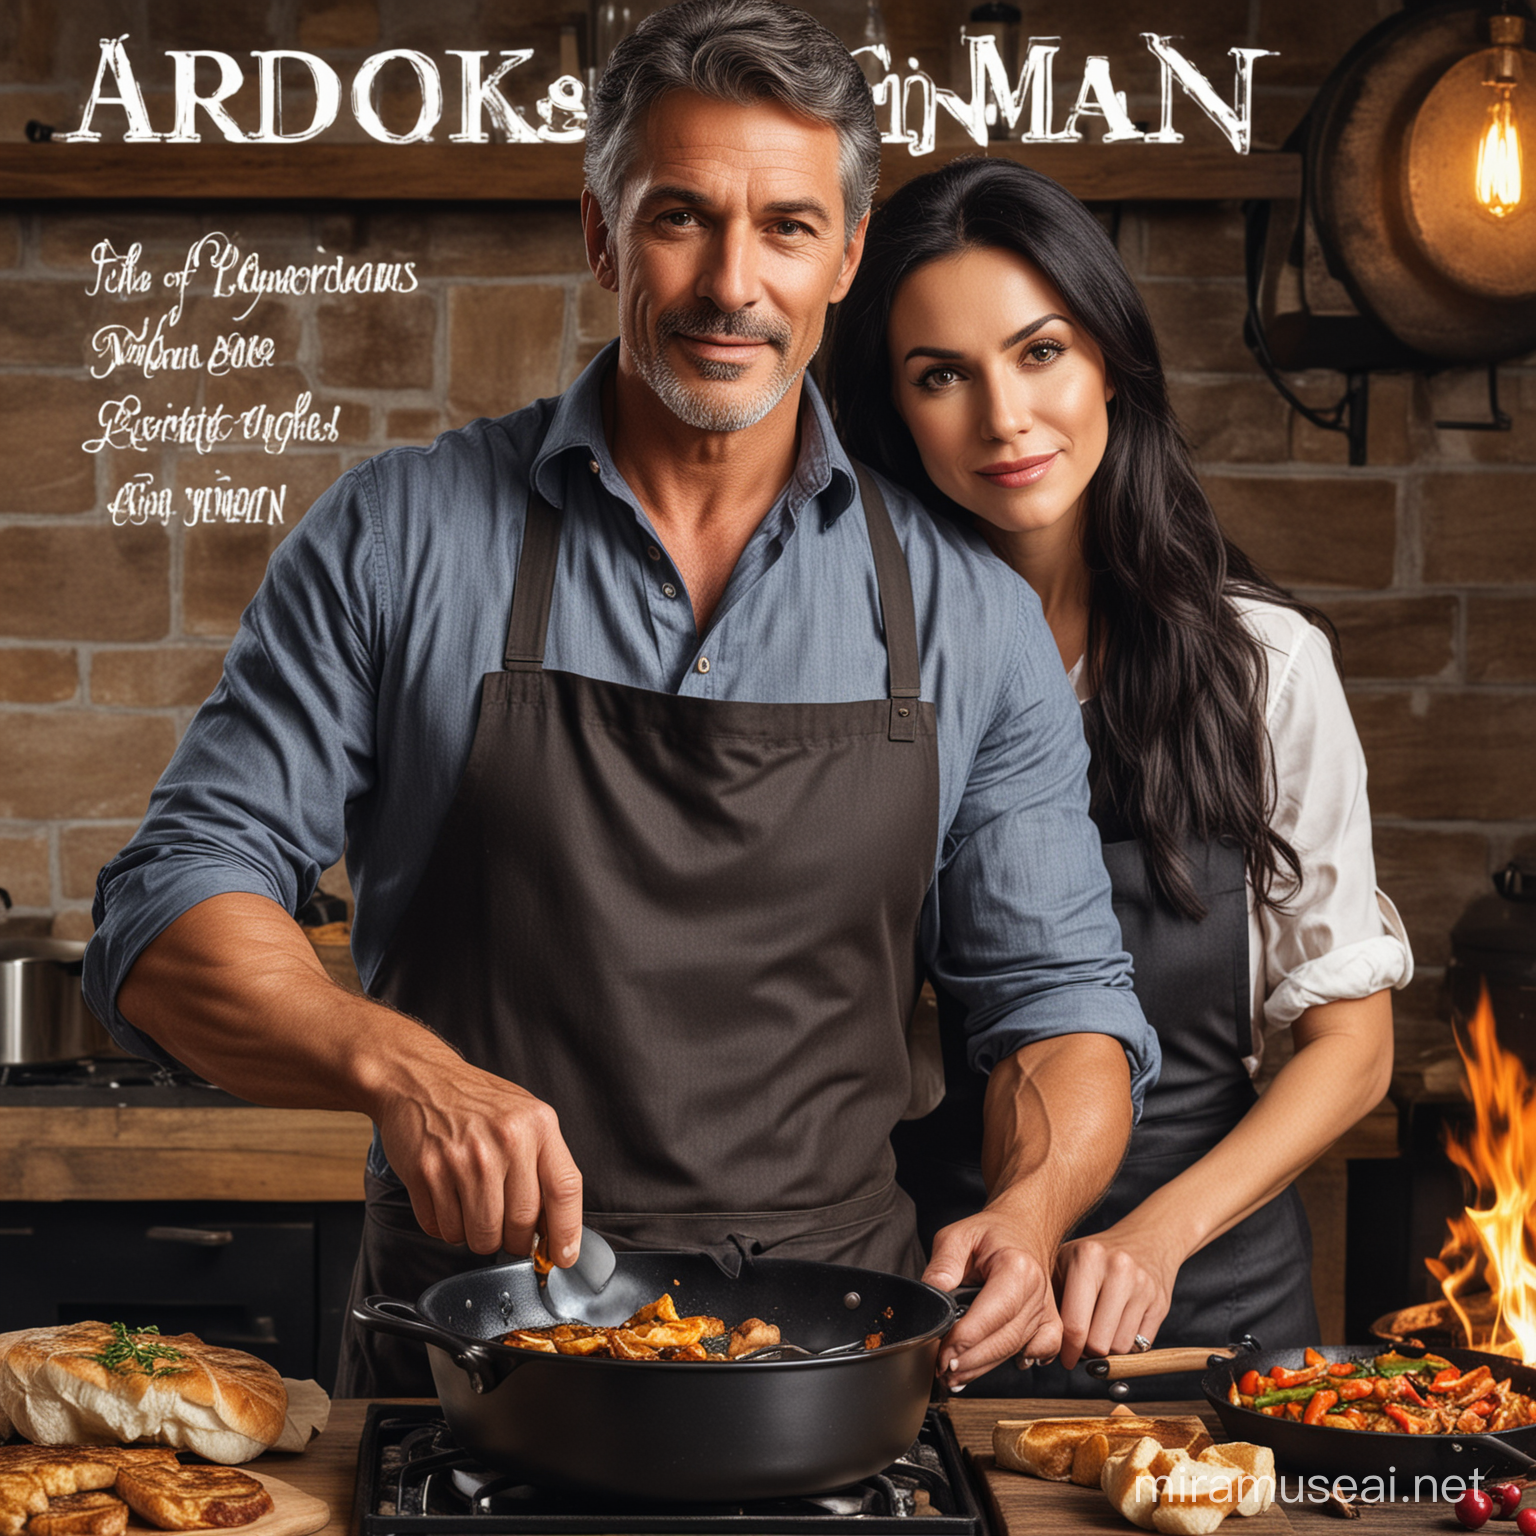 Handsome Brunet Man and Beautiful Woman Cooking Together in Restaurant Scene